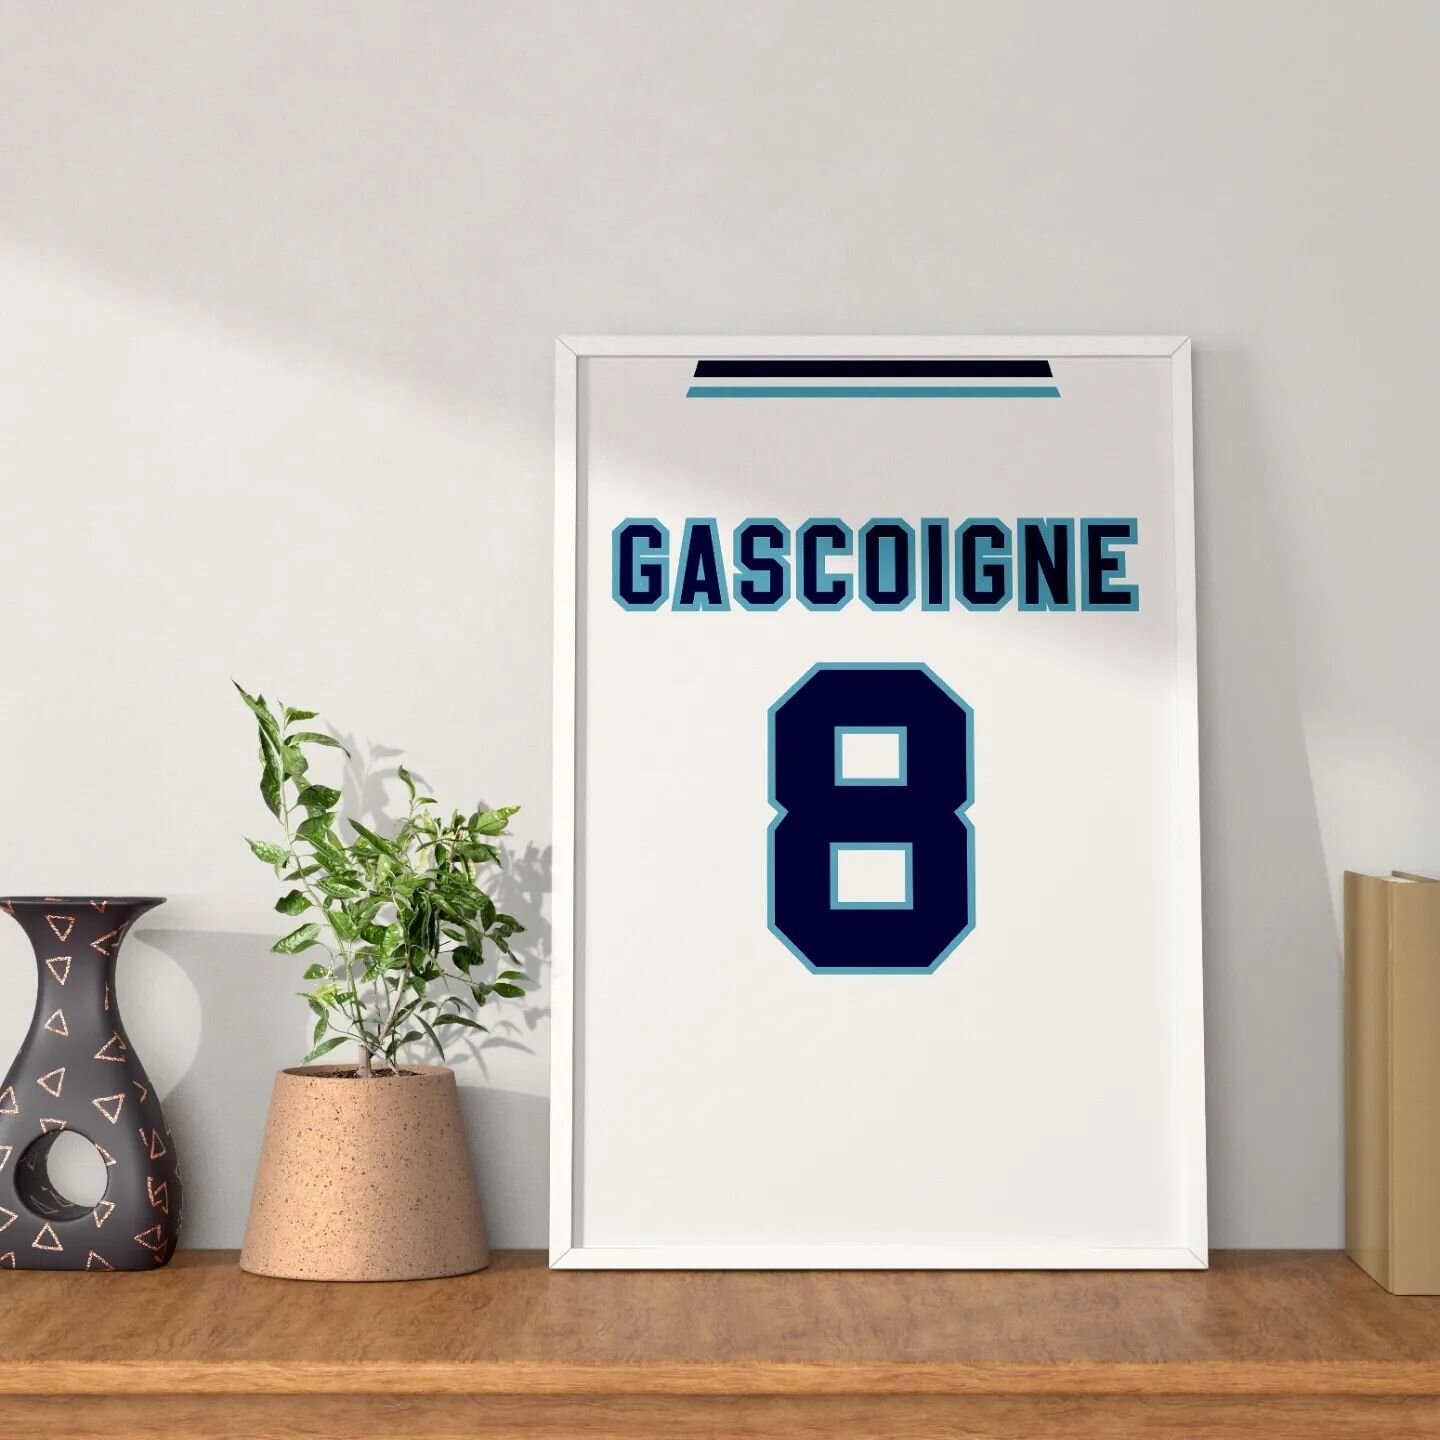 Mad, bad and a little bit crazy but he could play!

This Gazza Euro 96 '8' shirt is a great piece of wall art for Gazza and England fans everywhere!

#gazza #footballgift #footballprint 

Link in bio 👊⚽